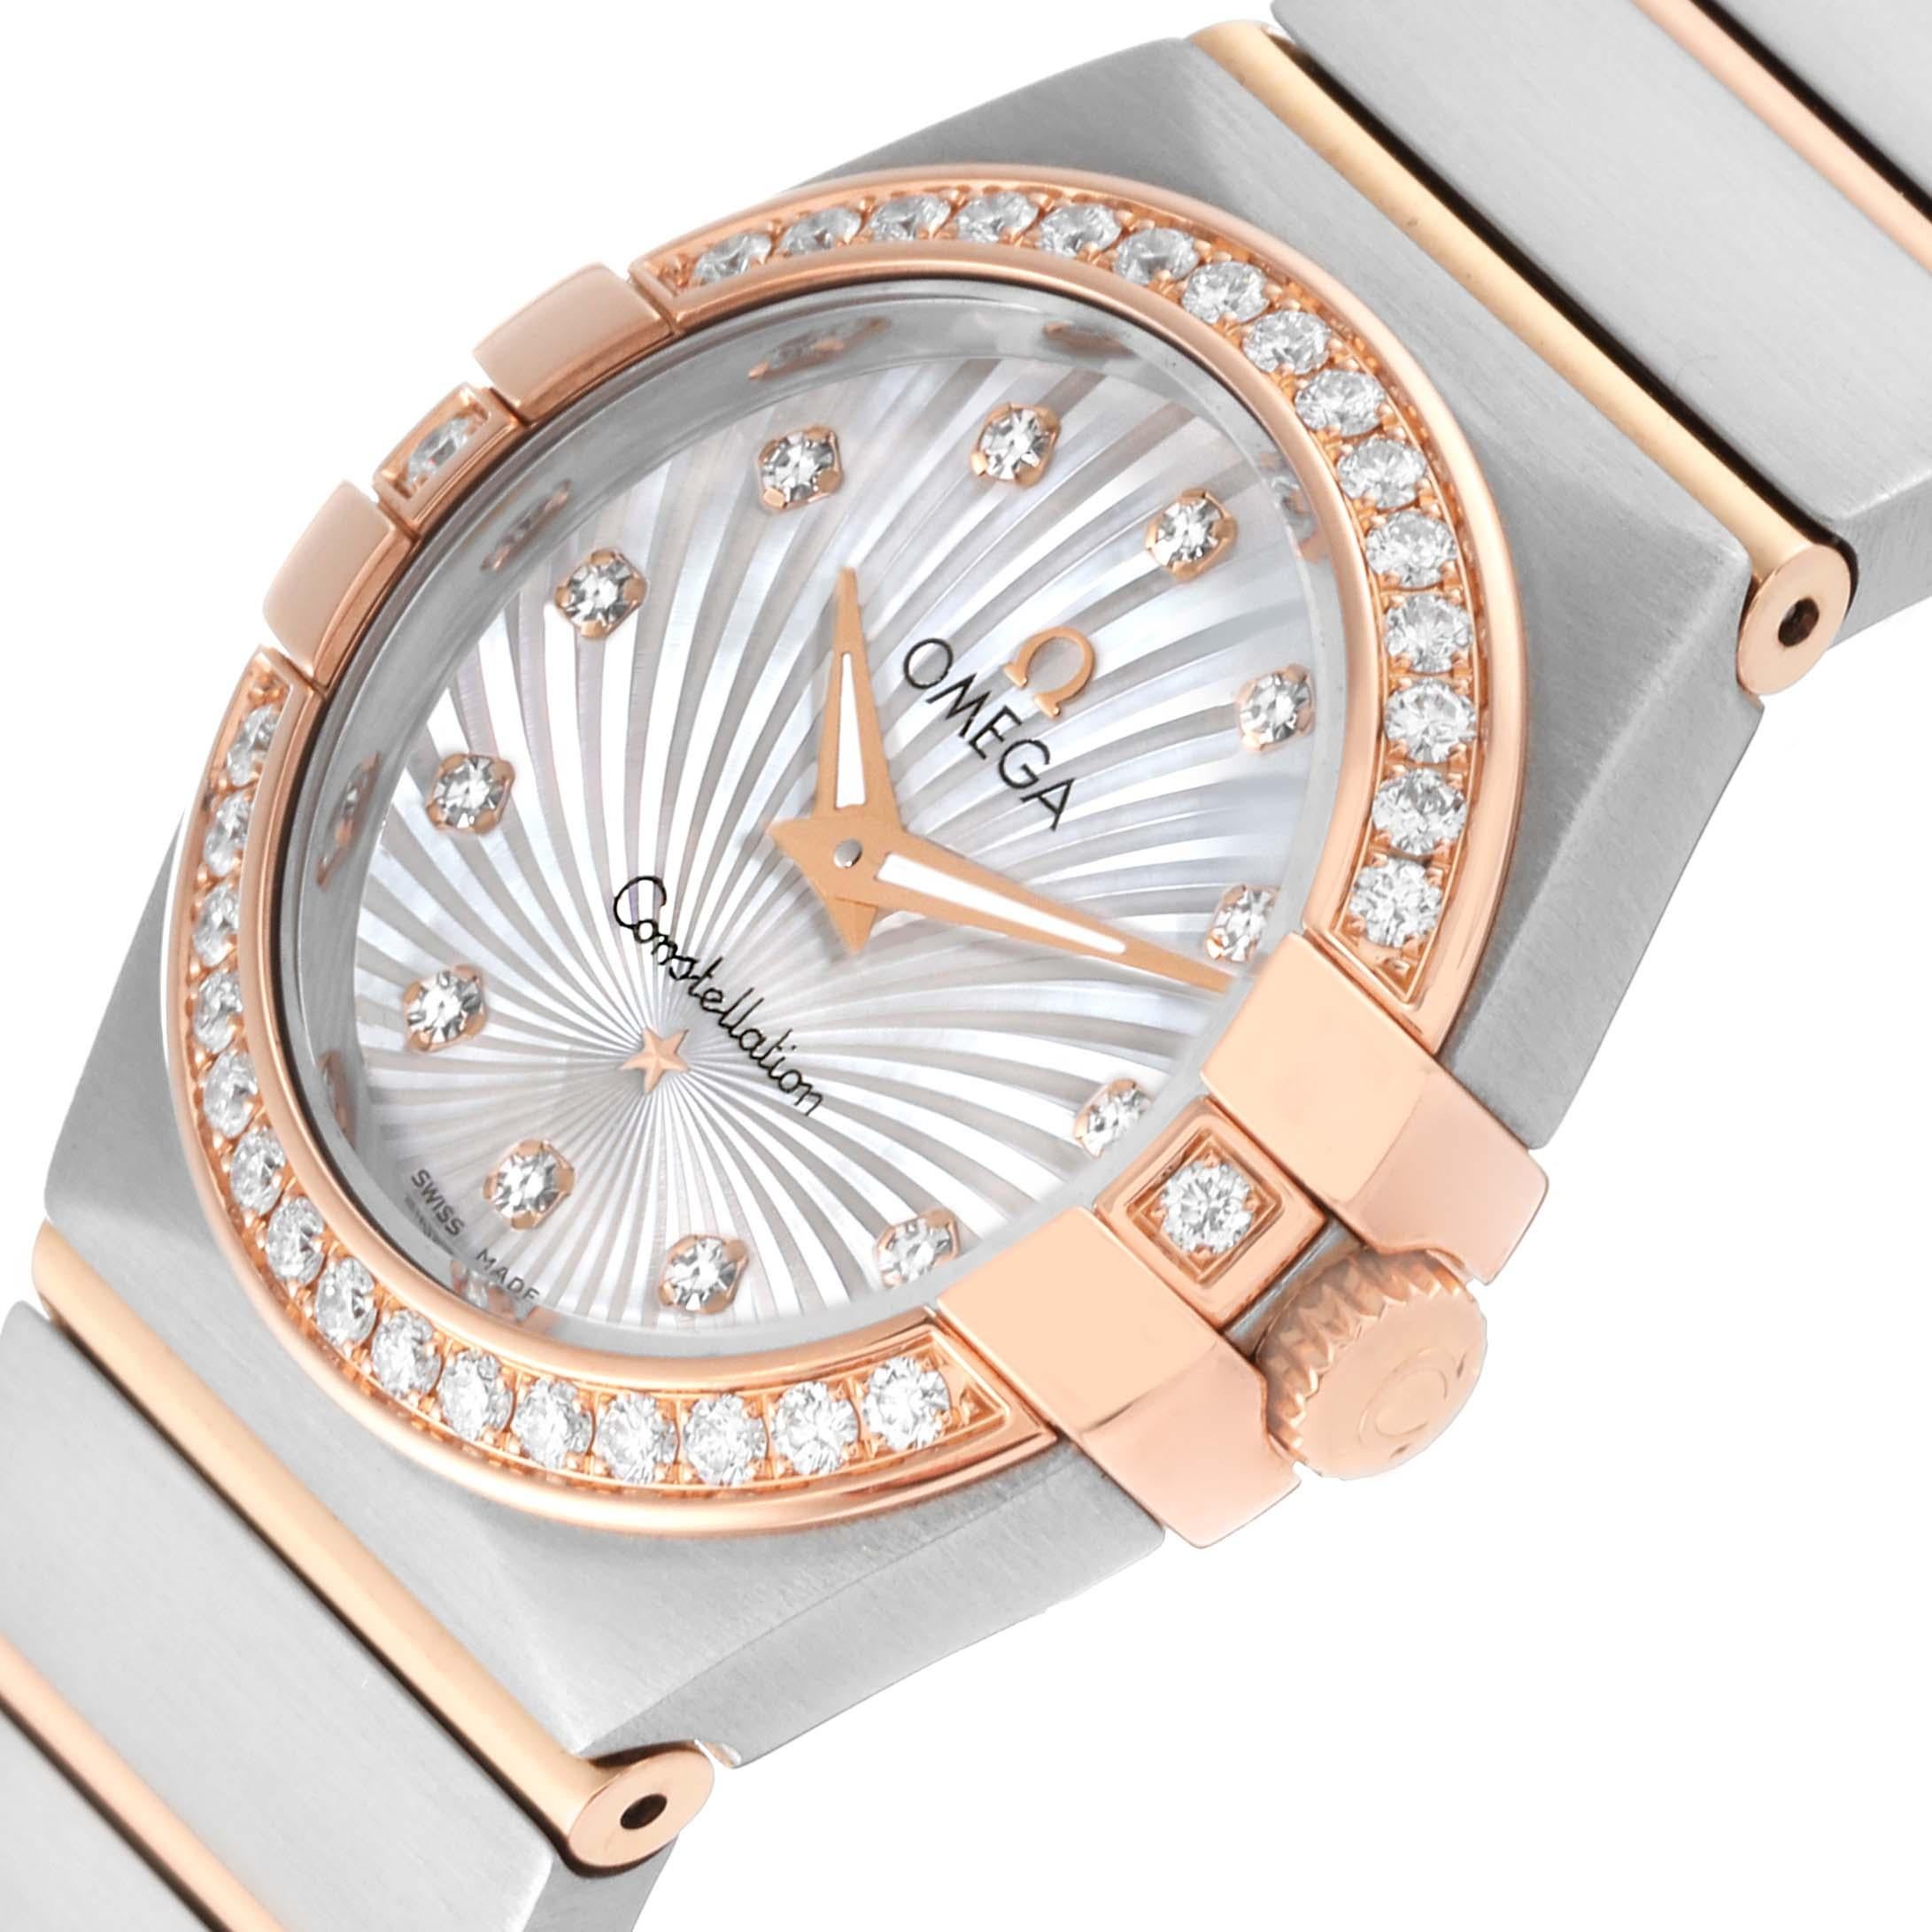 Omega Constellation 27 Steel Rose Gold MOP Diamond Watch 123.25.27.60.55.002. Quartz movement. Stainless steel brushed round case 27 mm in diameter with 18k Rose gold crown. 18k rose gold diamond bezel. Scratch resistant sapphire crystal. Supernova